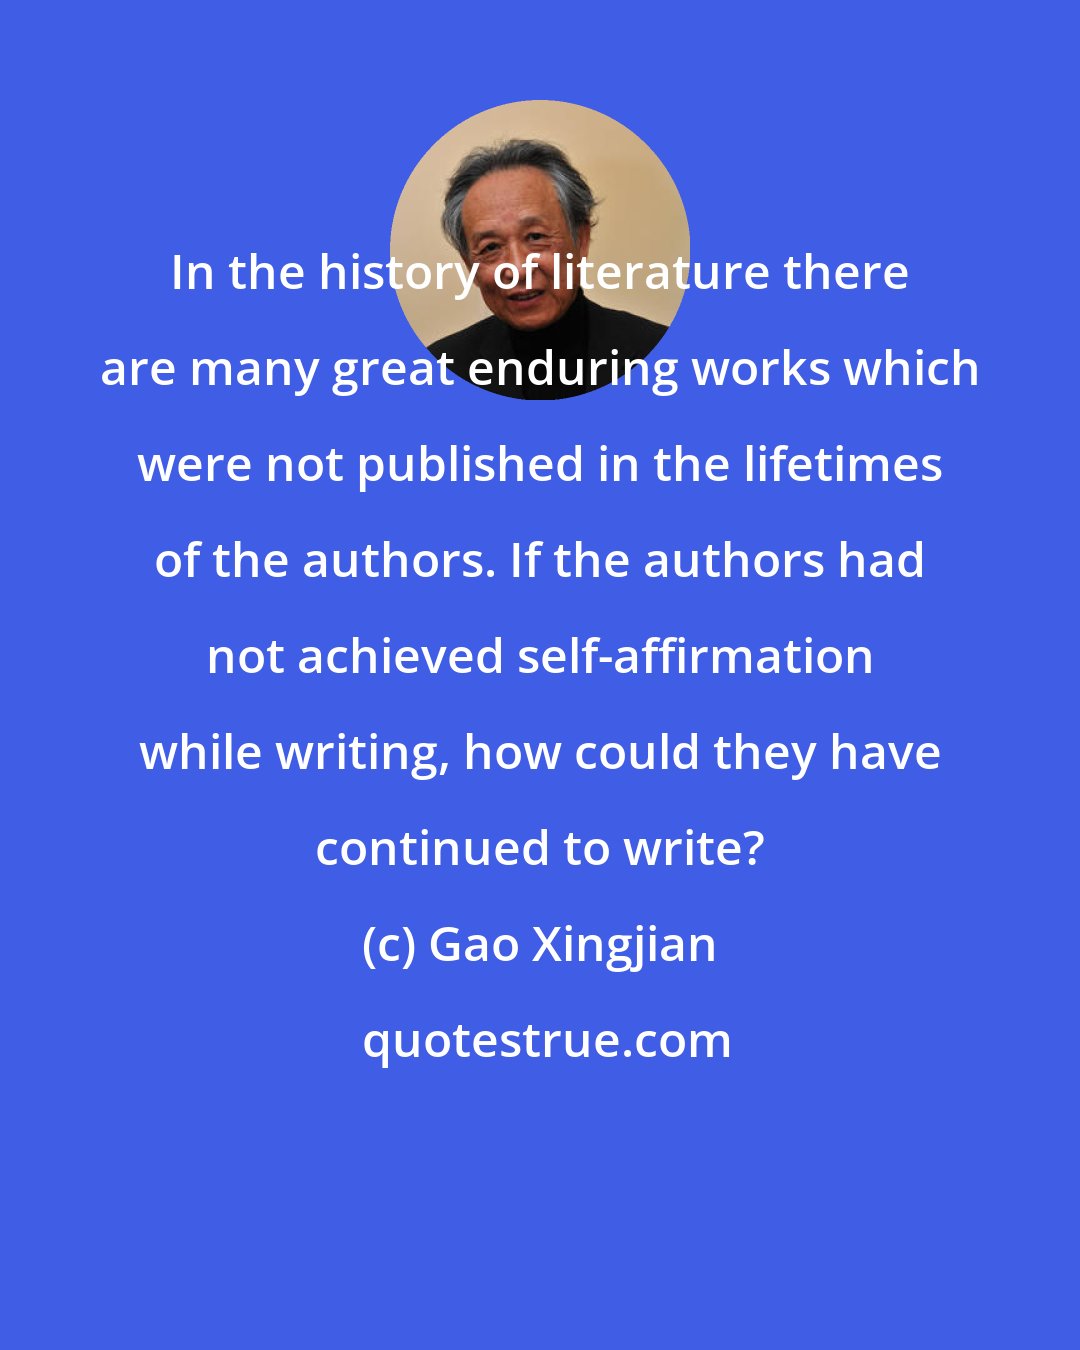 Gao Xingjian: In the history of literature there are many great enduring works which were not published in the lifetimes of the authors. If the authors had not achieved self-affirmation while writing, how could they have continued to write?